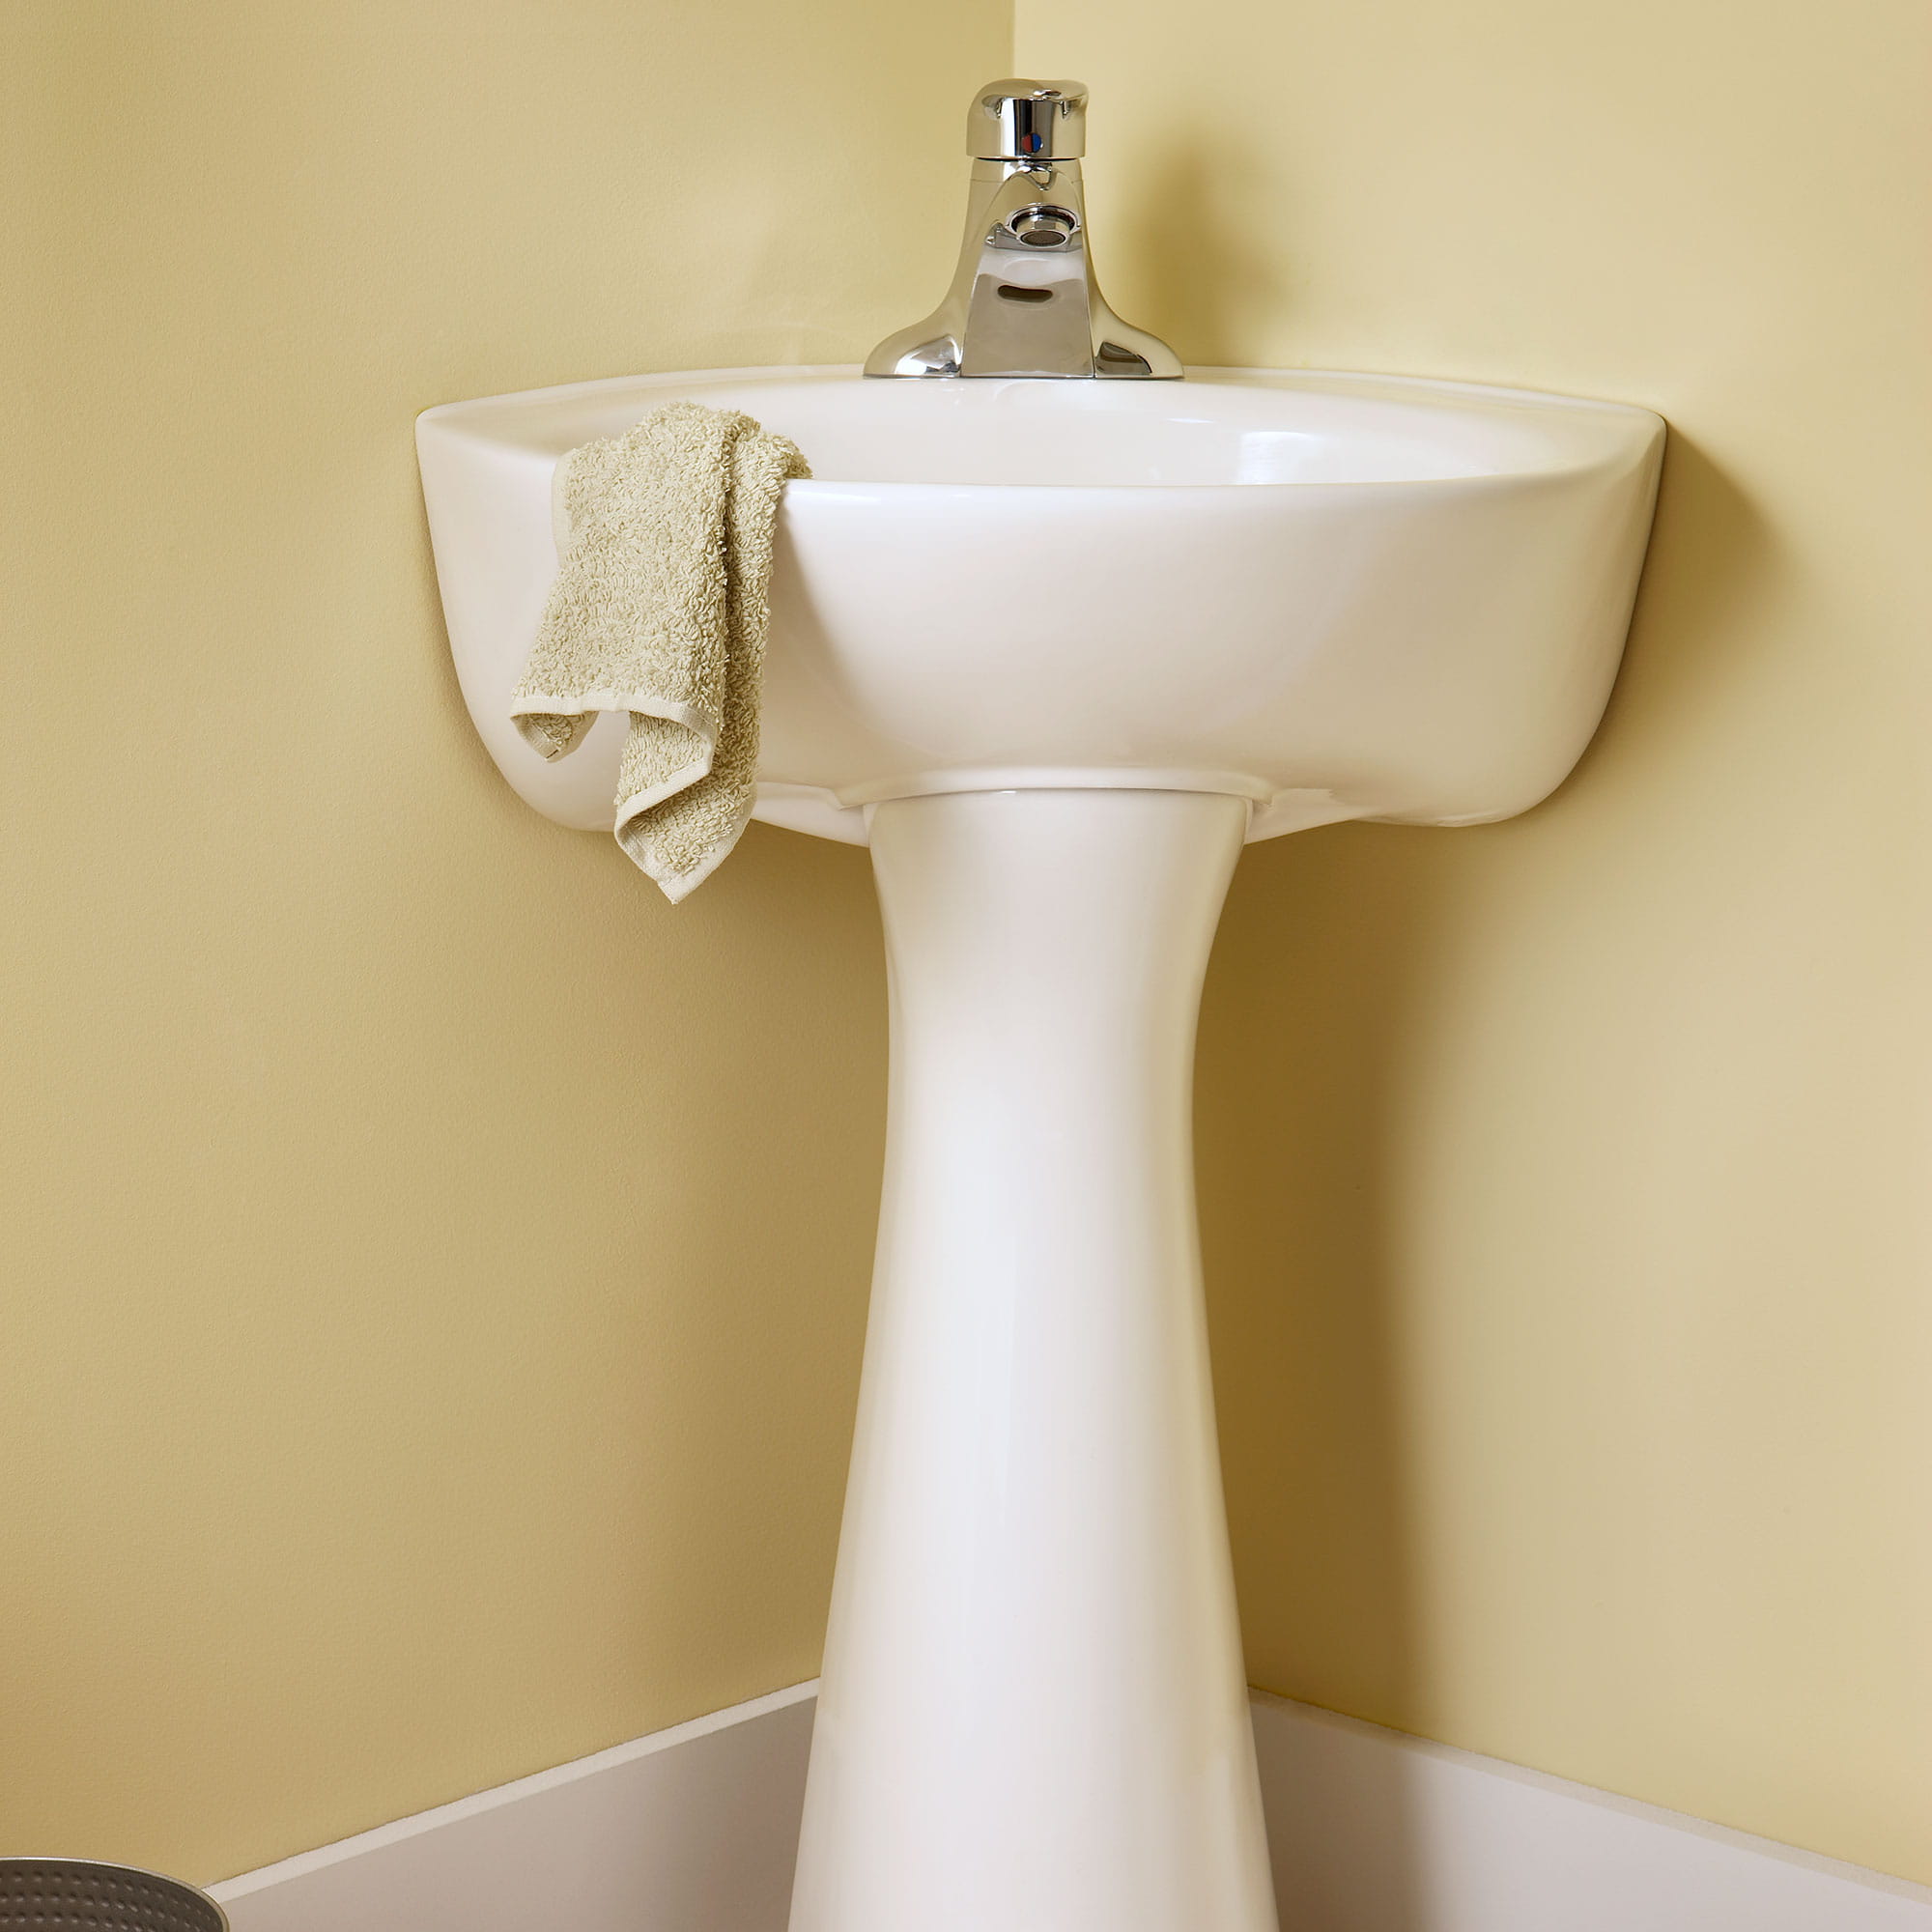 Cornice 4 Inch Centerset Pedestal Sink Top and Leg Combination WHITE